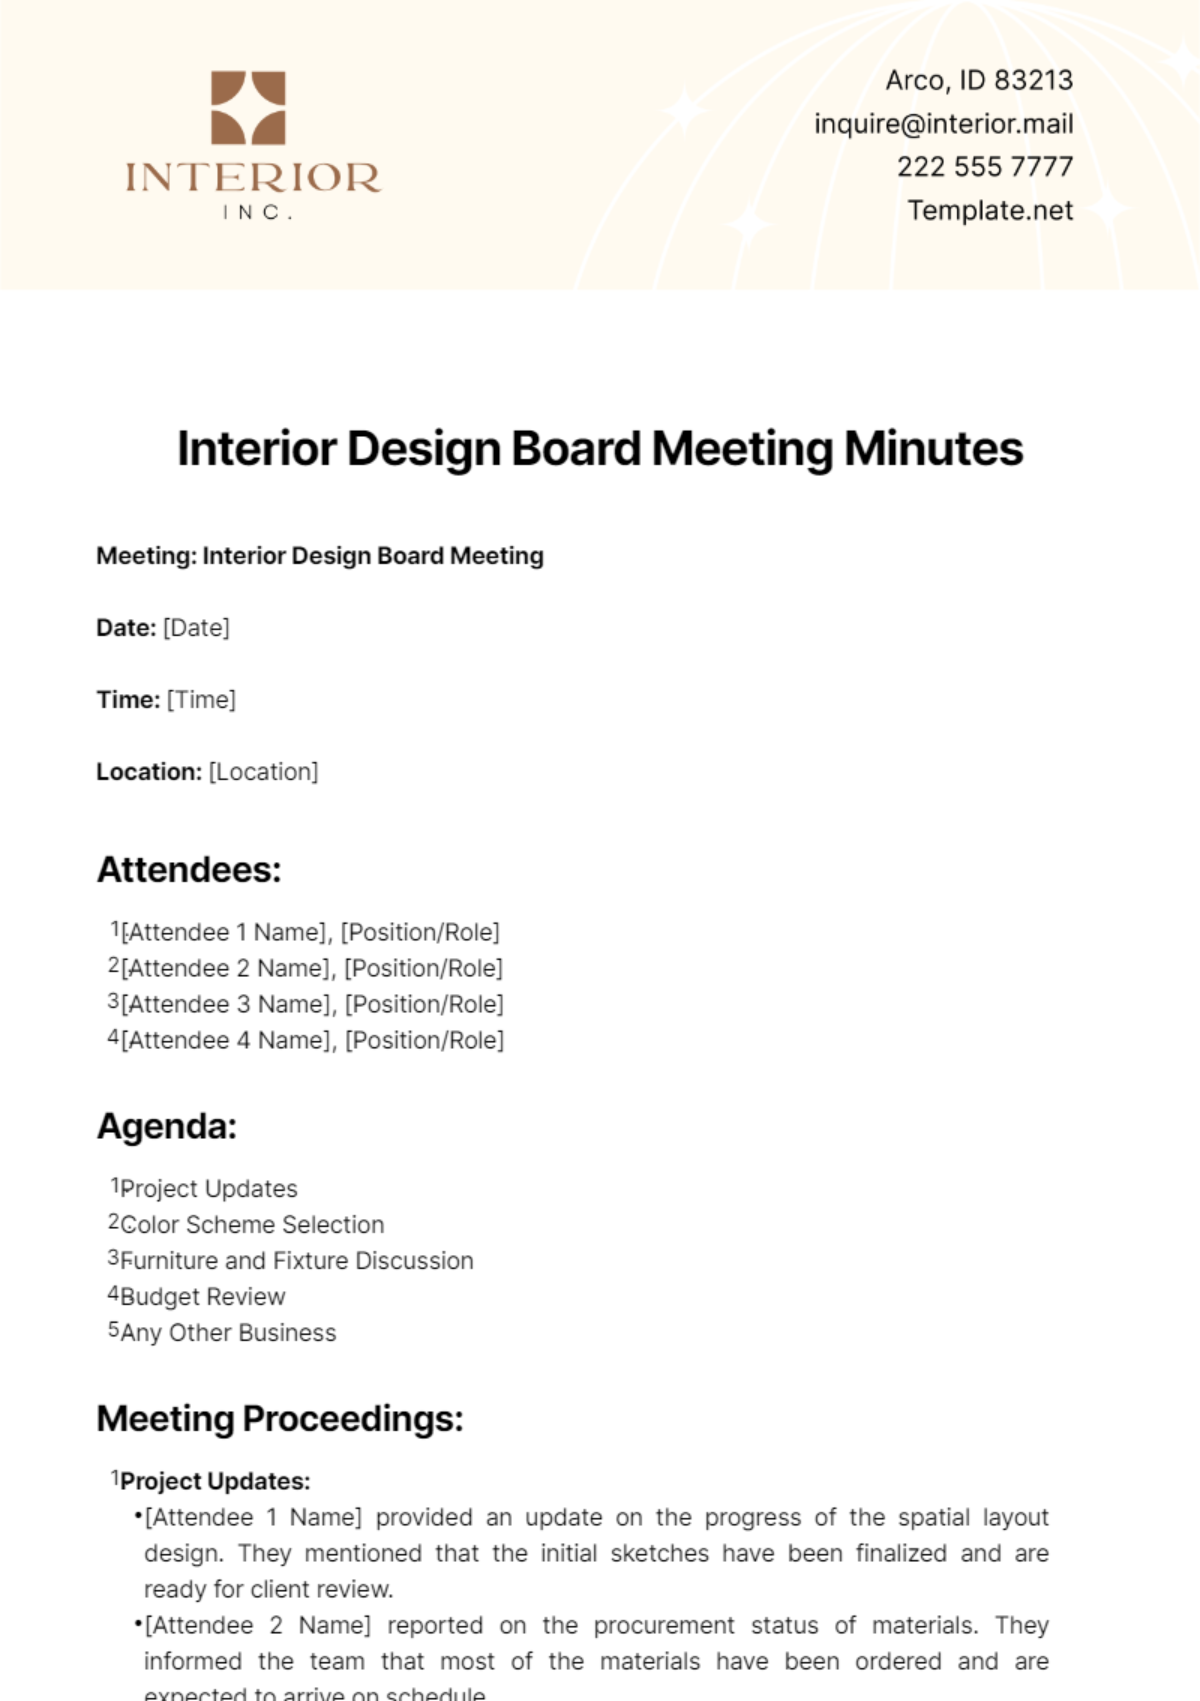 Free Interior Design Board Meeting Minutes Template